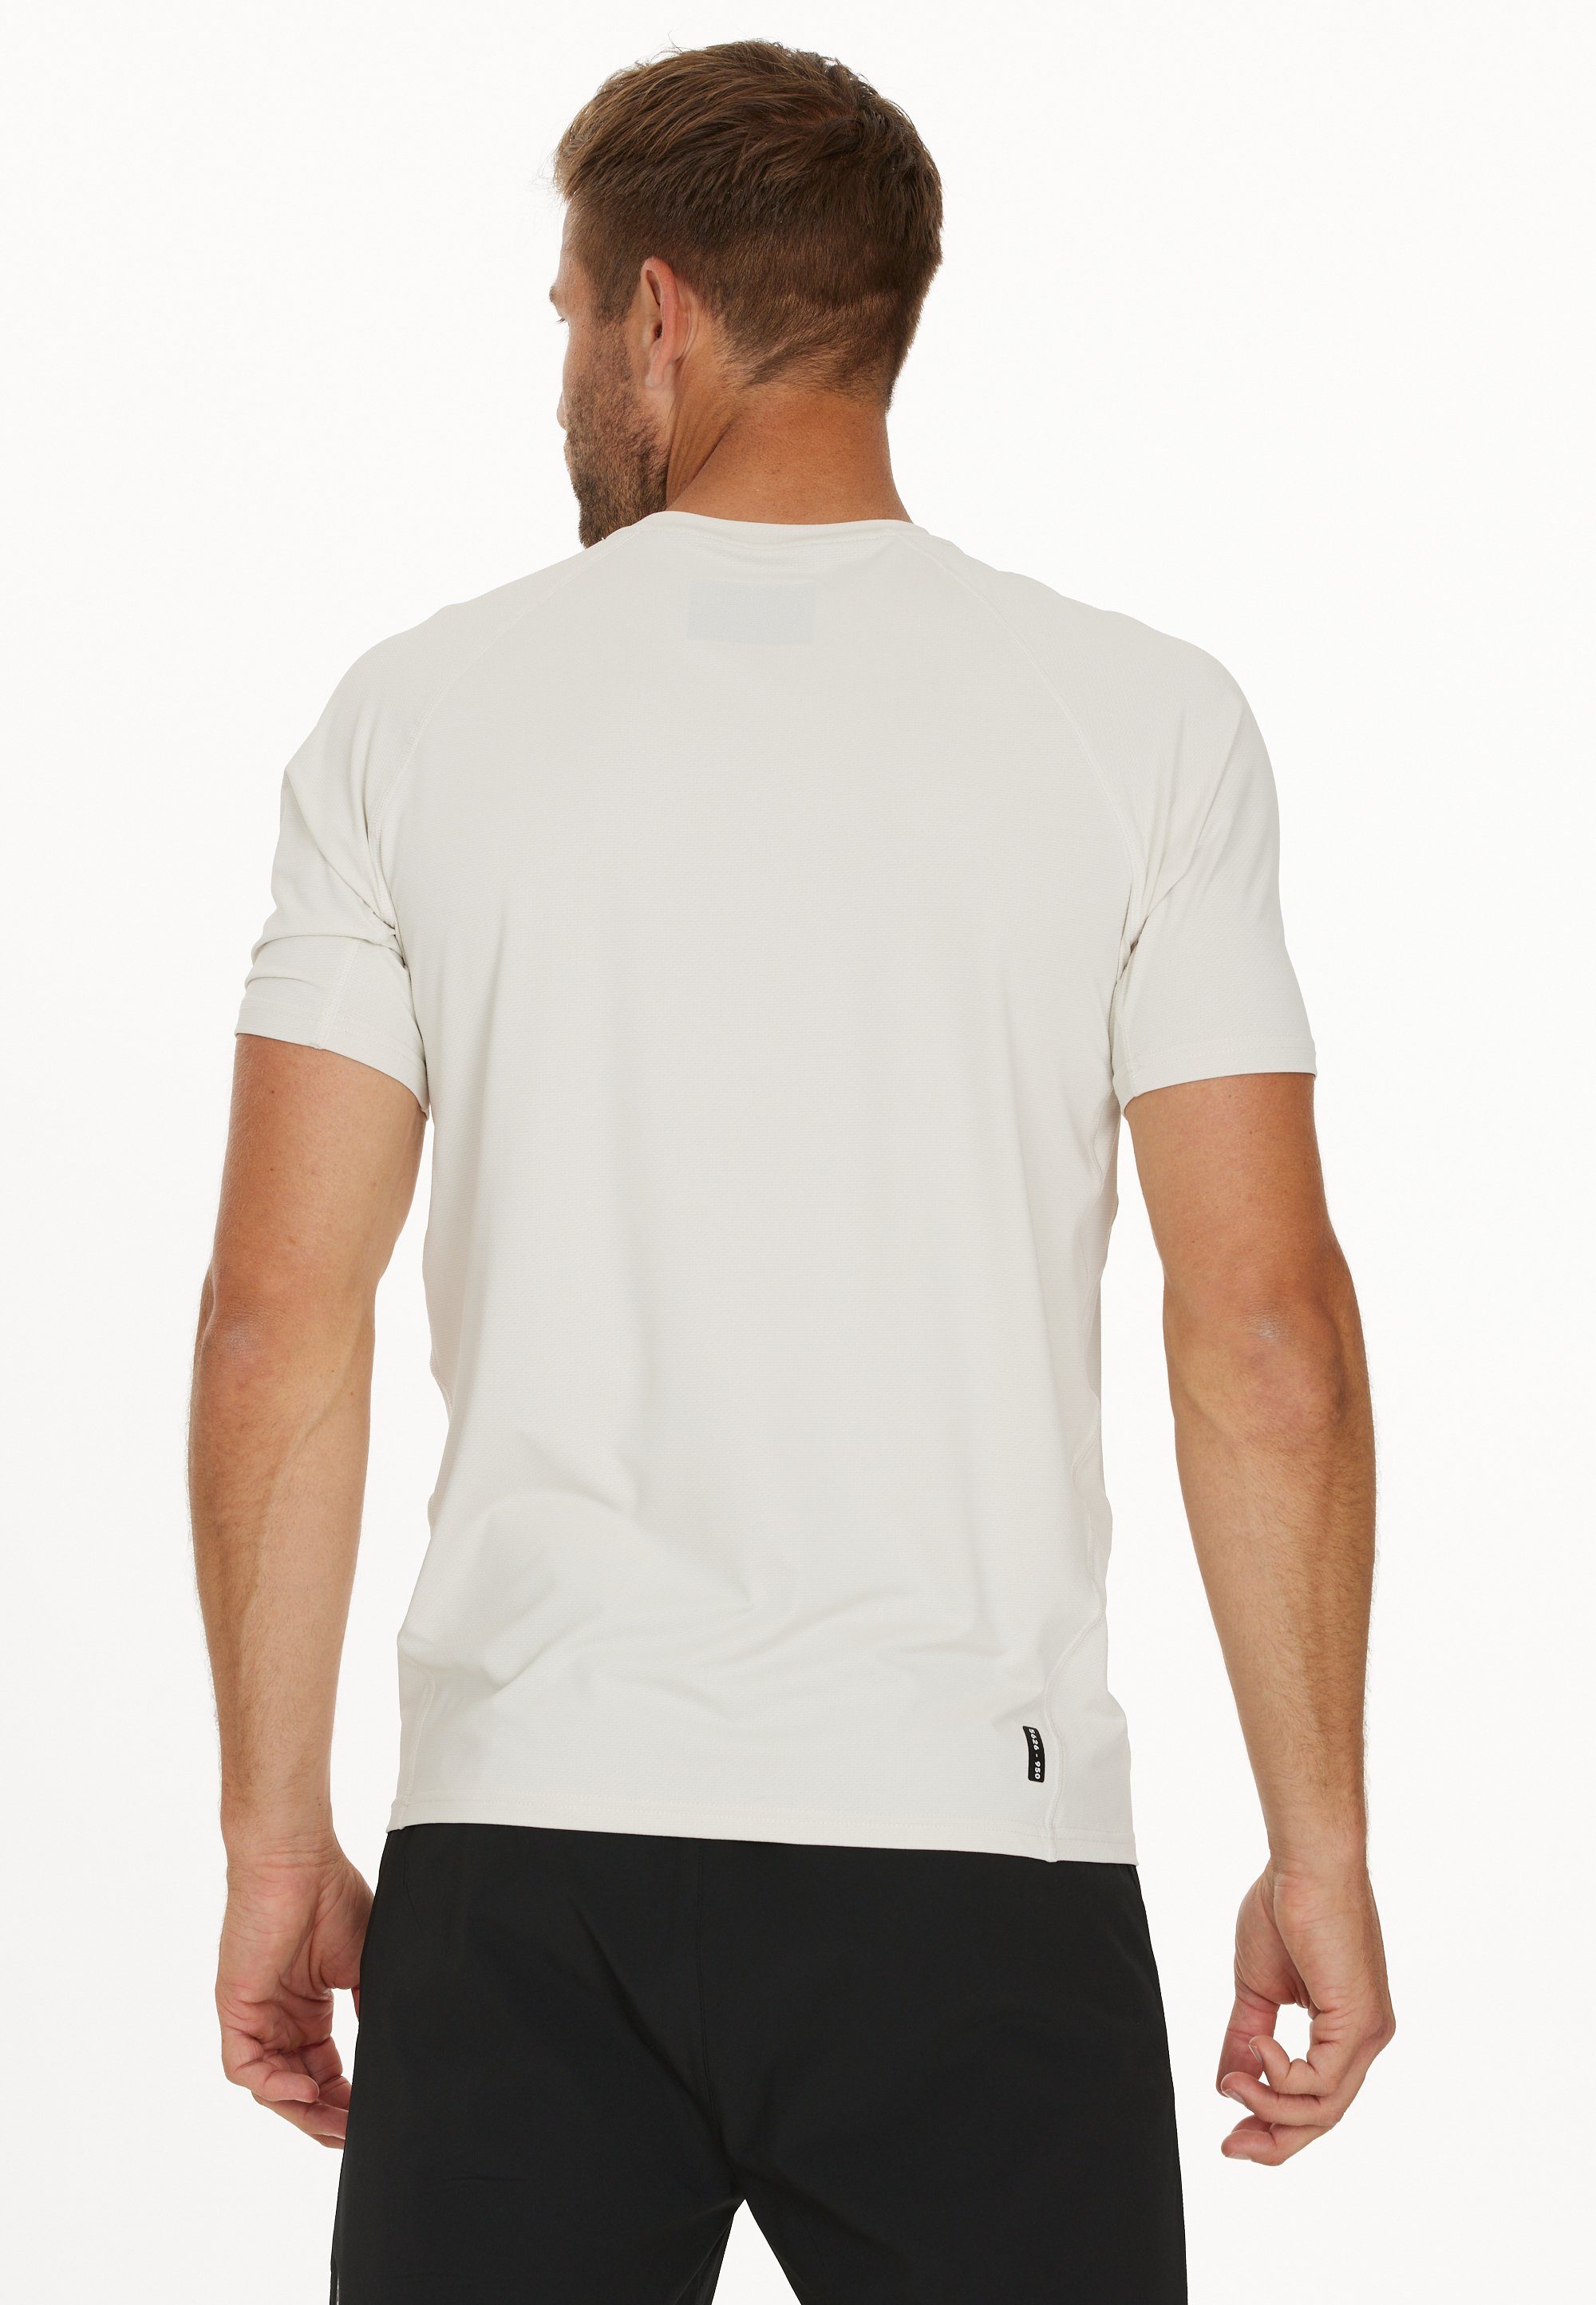 Toscan Virtus (1-tlg) mit Silver+-Technologie Muskelshirt offwhite